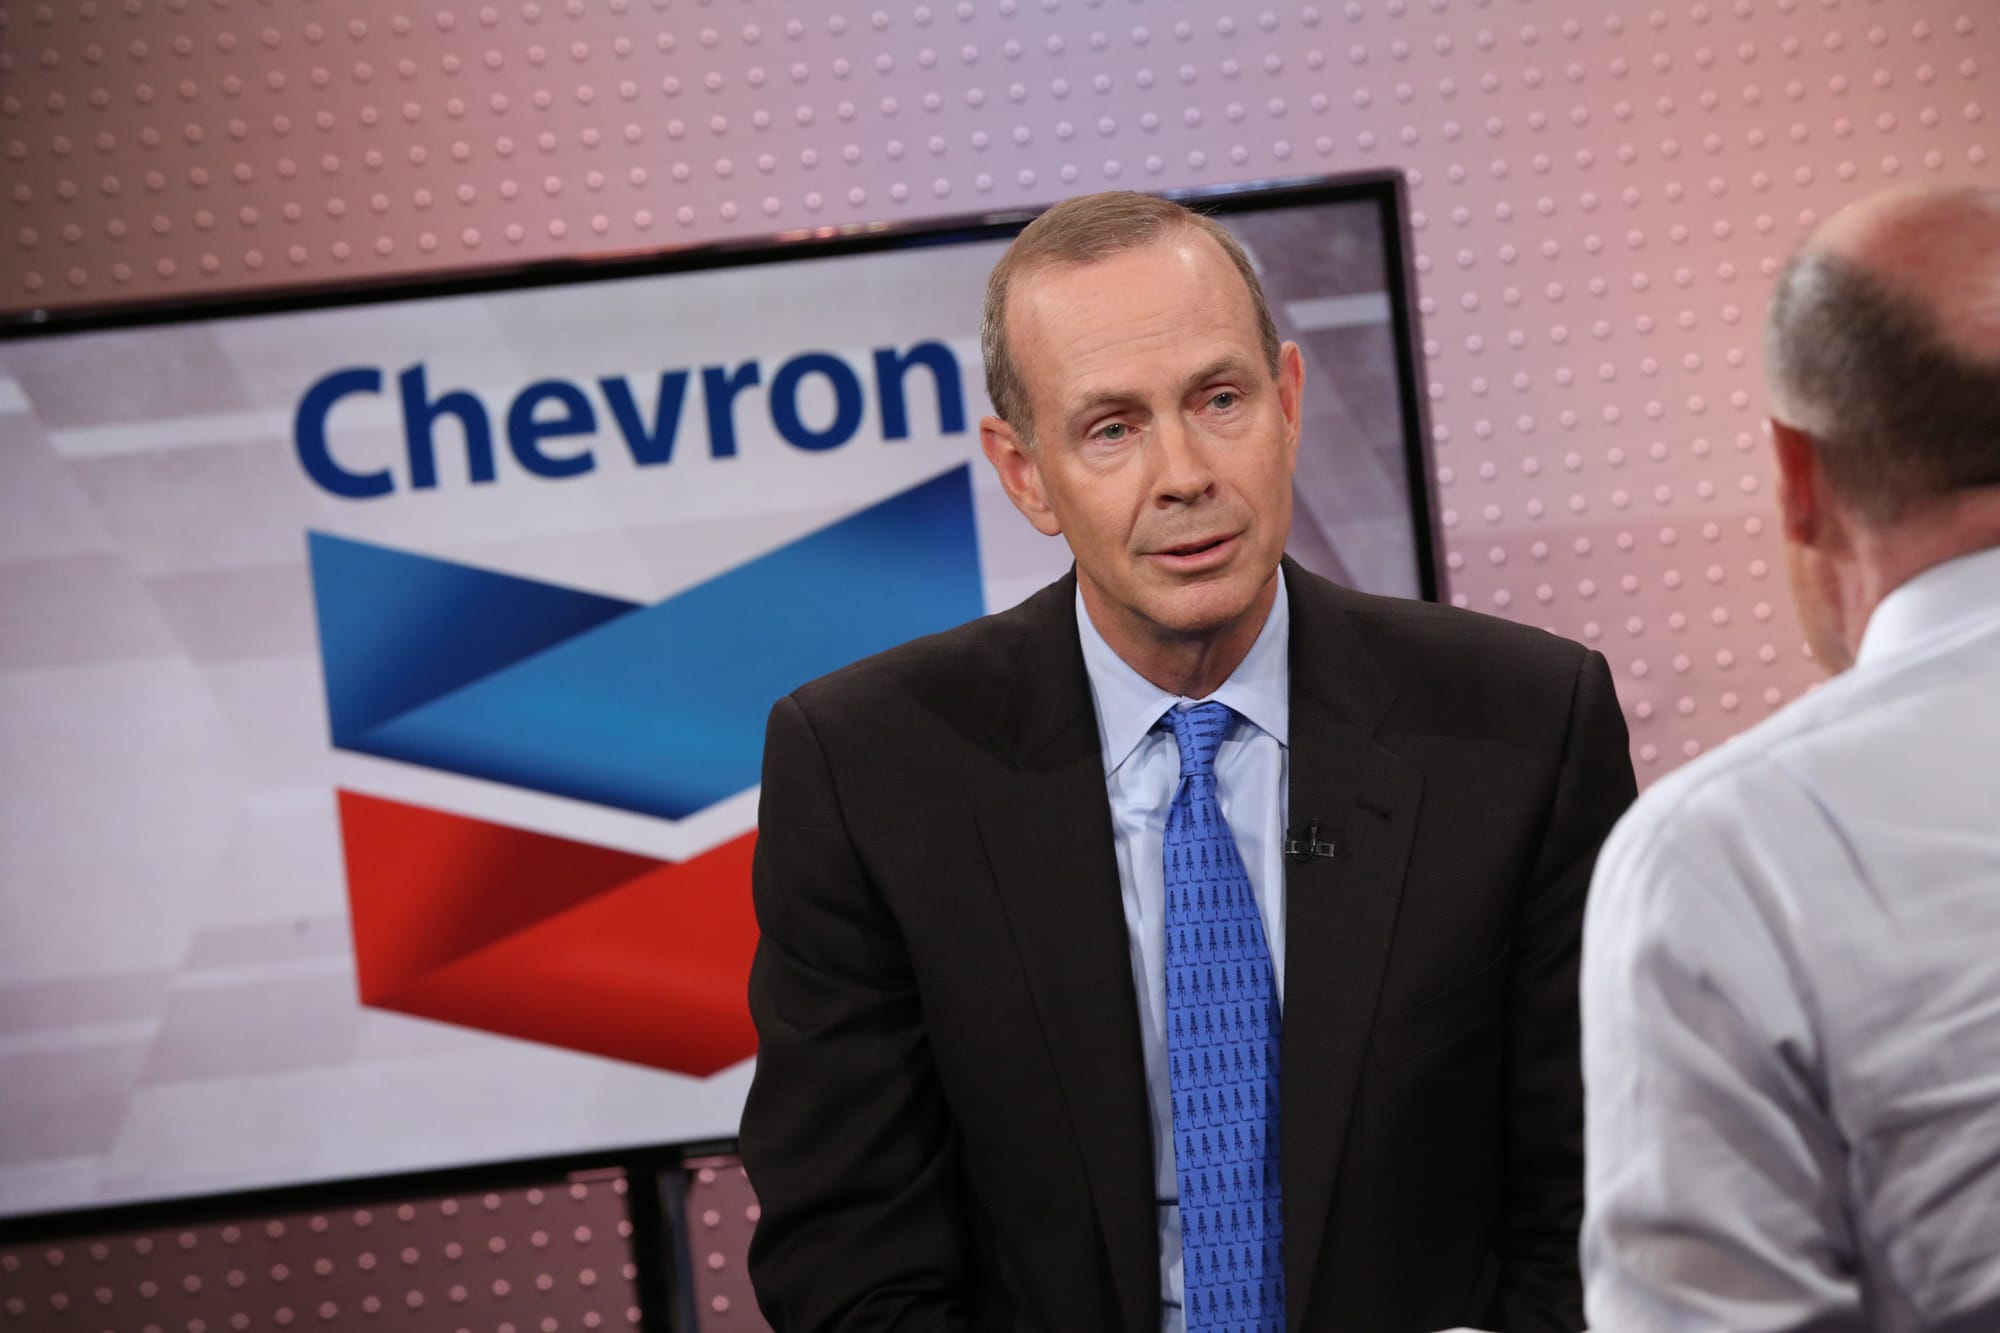 Chevron CEO says the dividend is the company’s No. 1 priority and is